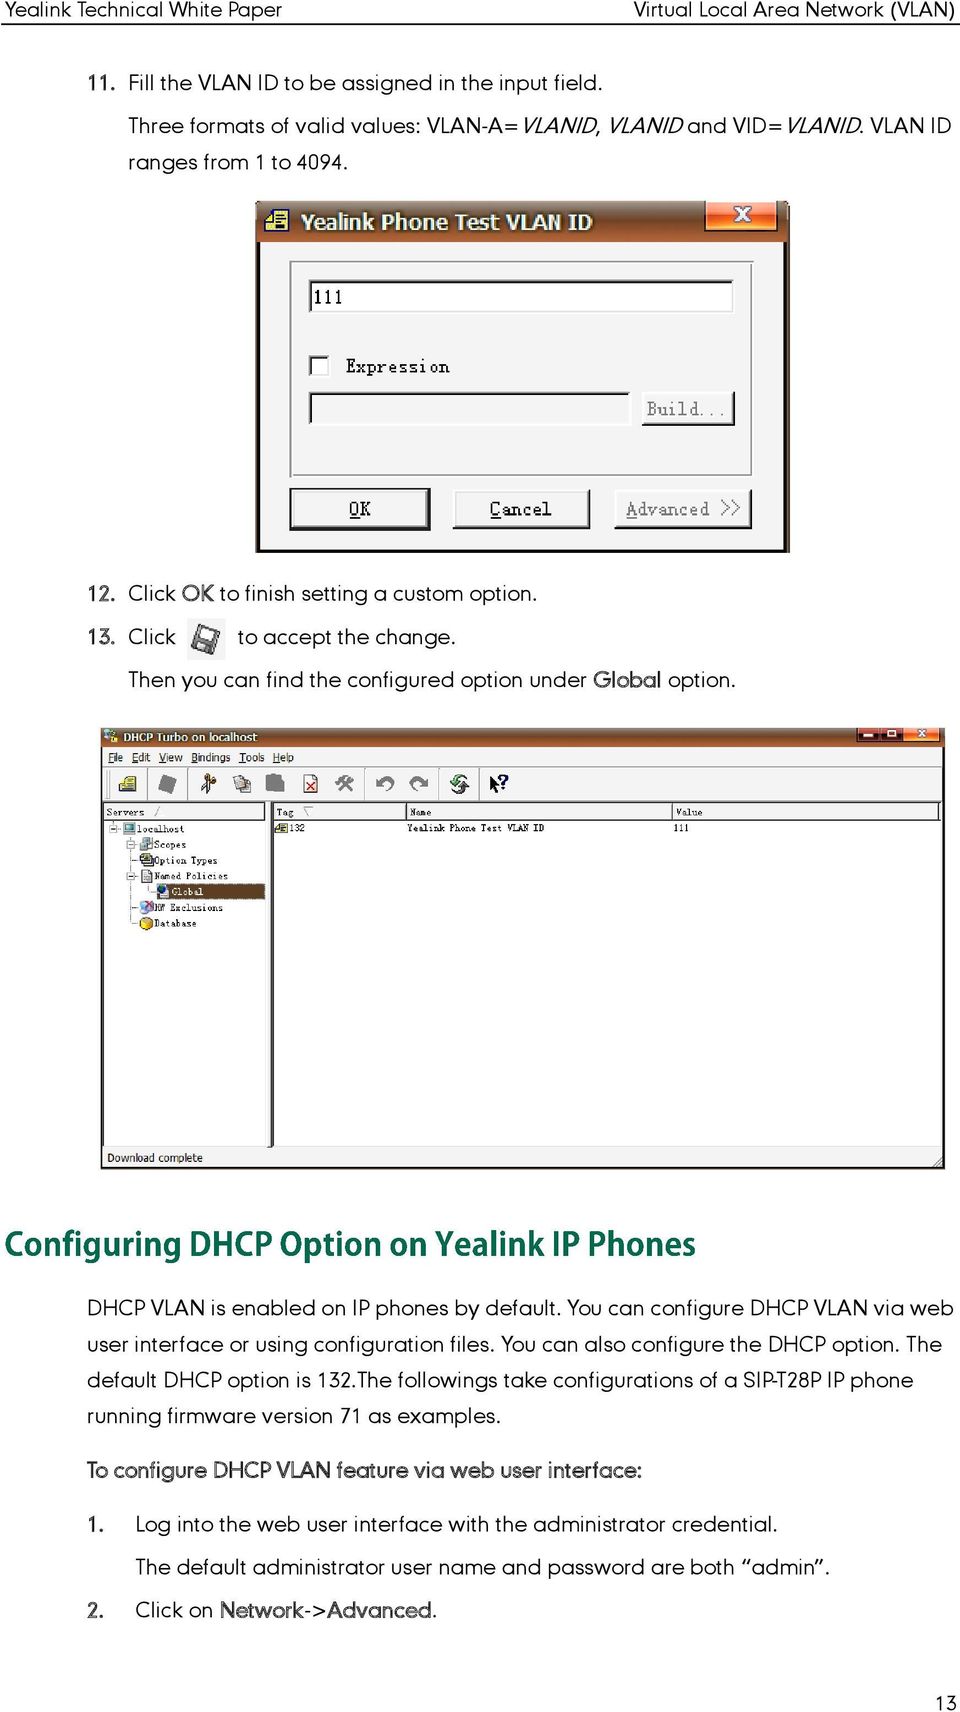 You can configure DHCP VLAN via web user interface or using configuration files. You can also configure the DHCP option. The default DHCP option is 132.